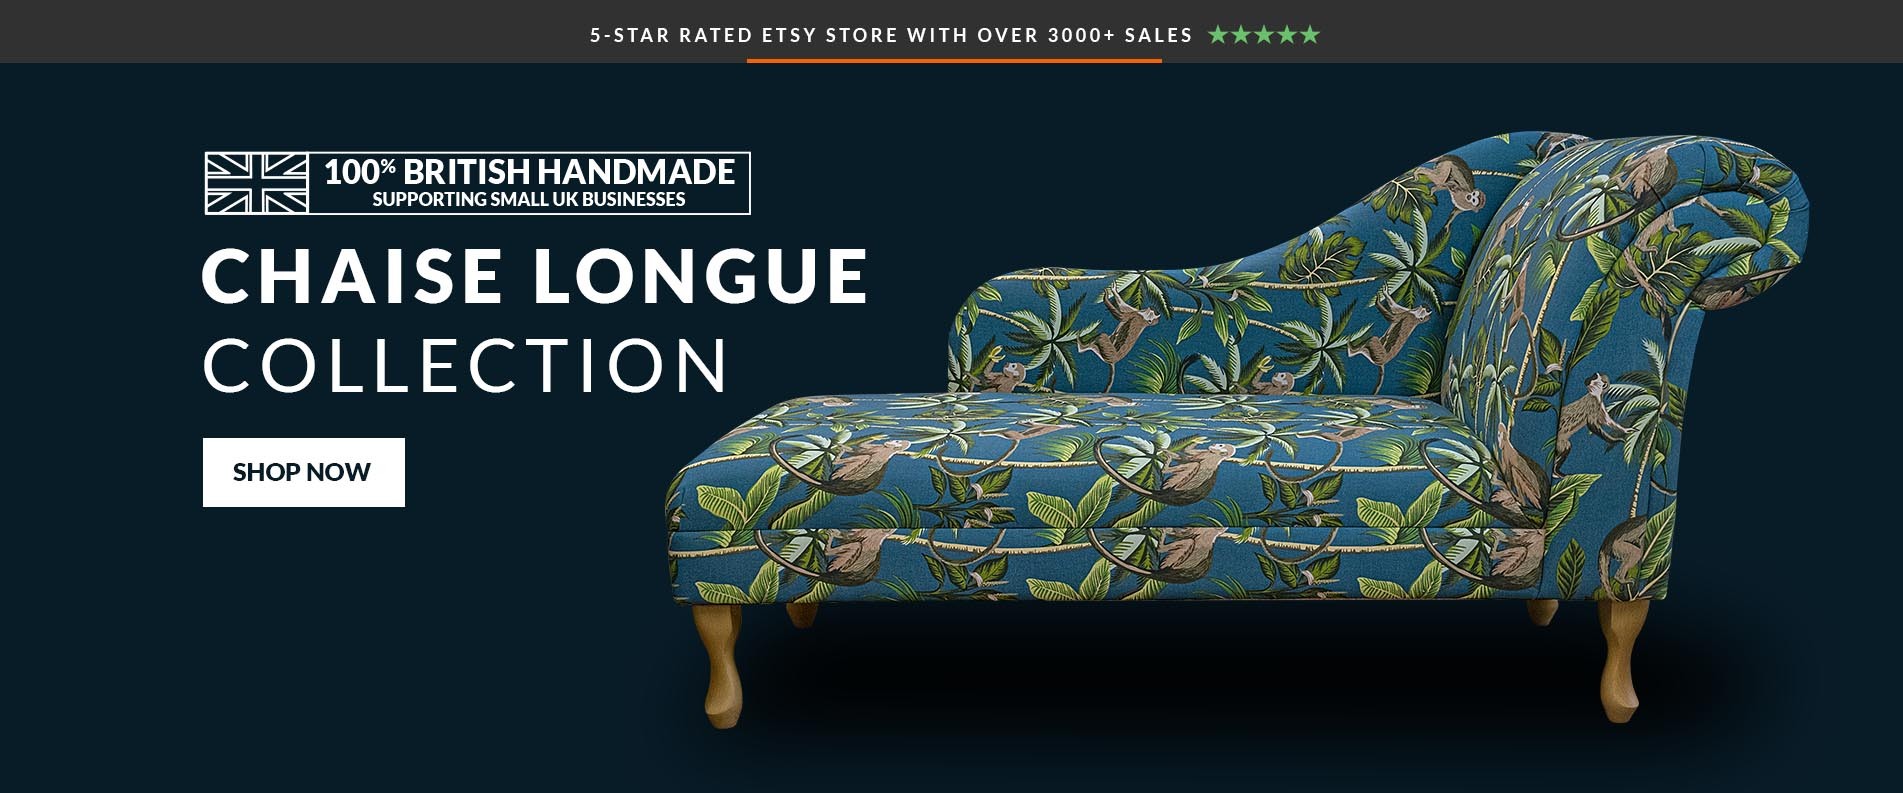 British Handmade Chaise Longue Collection